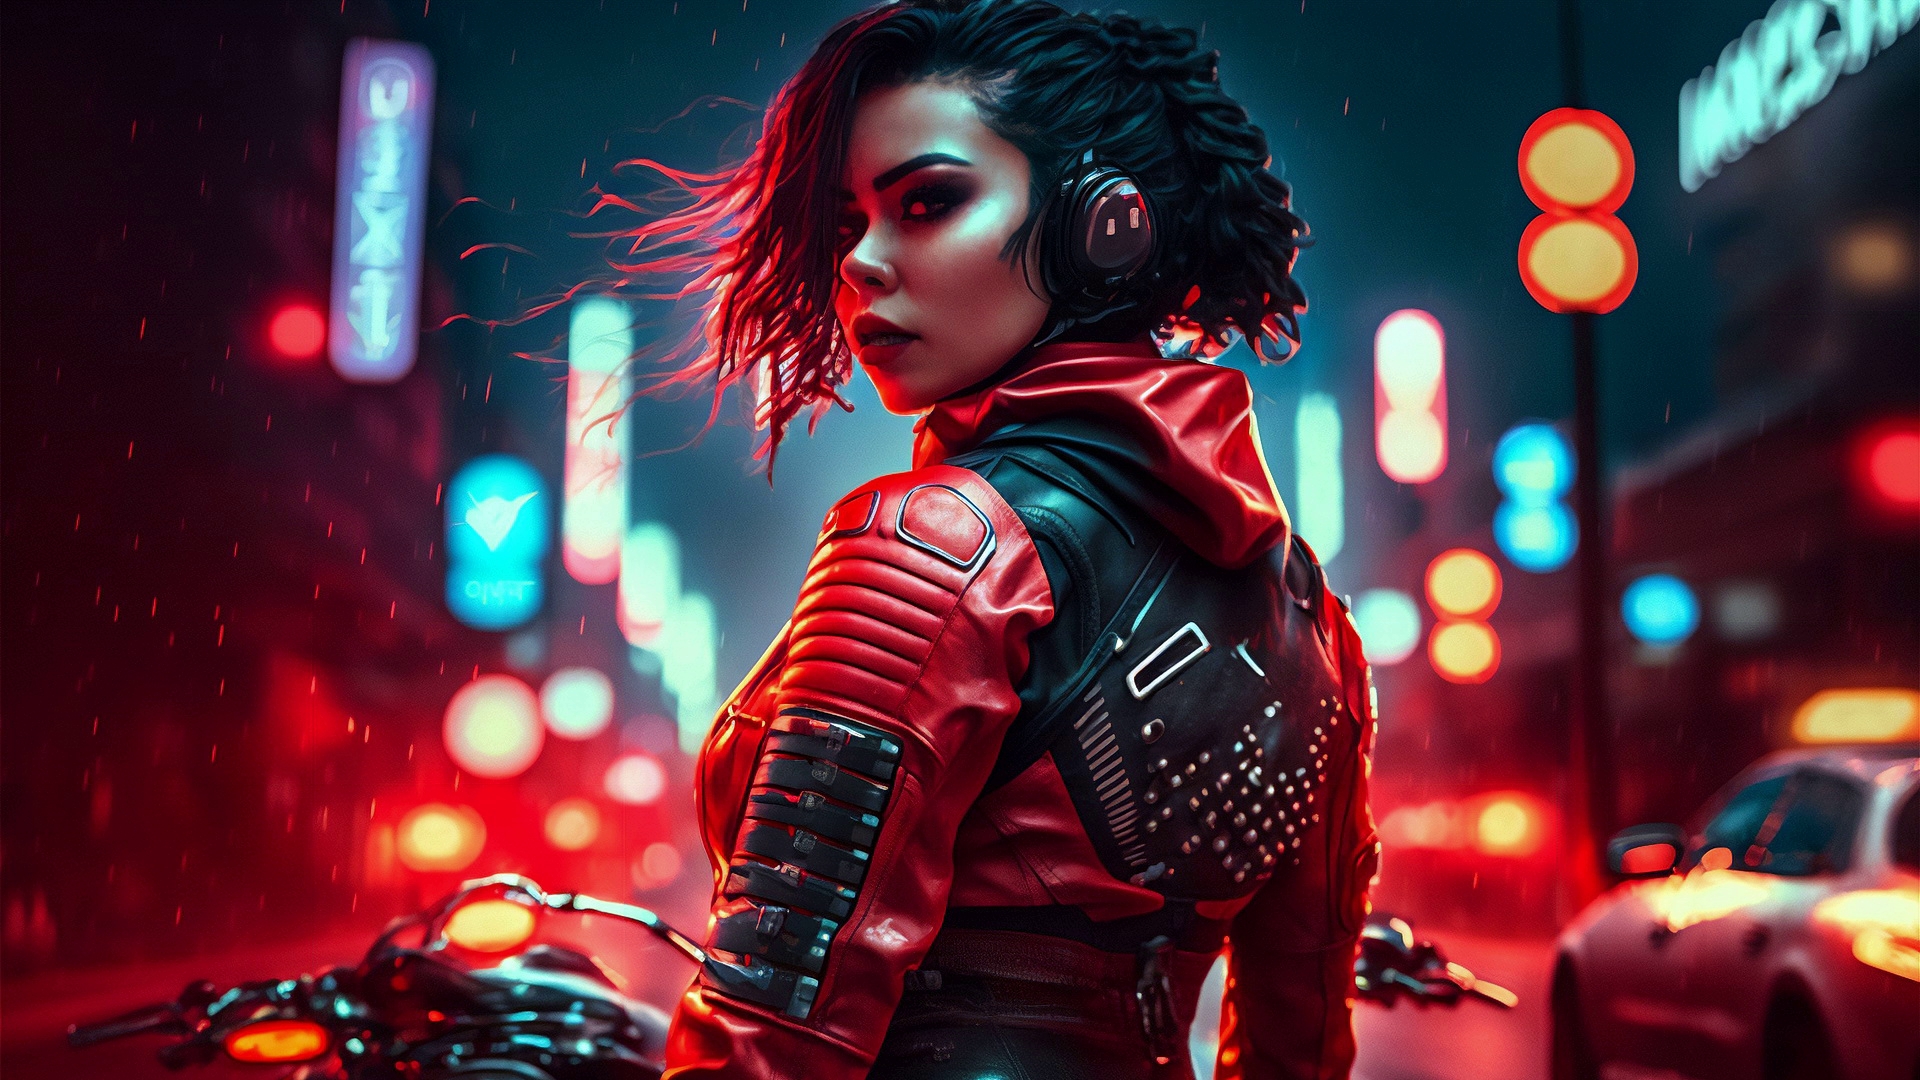 Free photo A girl biker wearing headphones and a red and black suit, standing on the road near a motorcycle against a background of lights